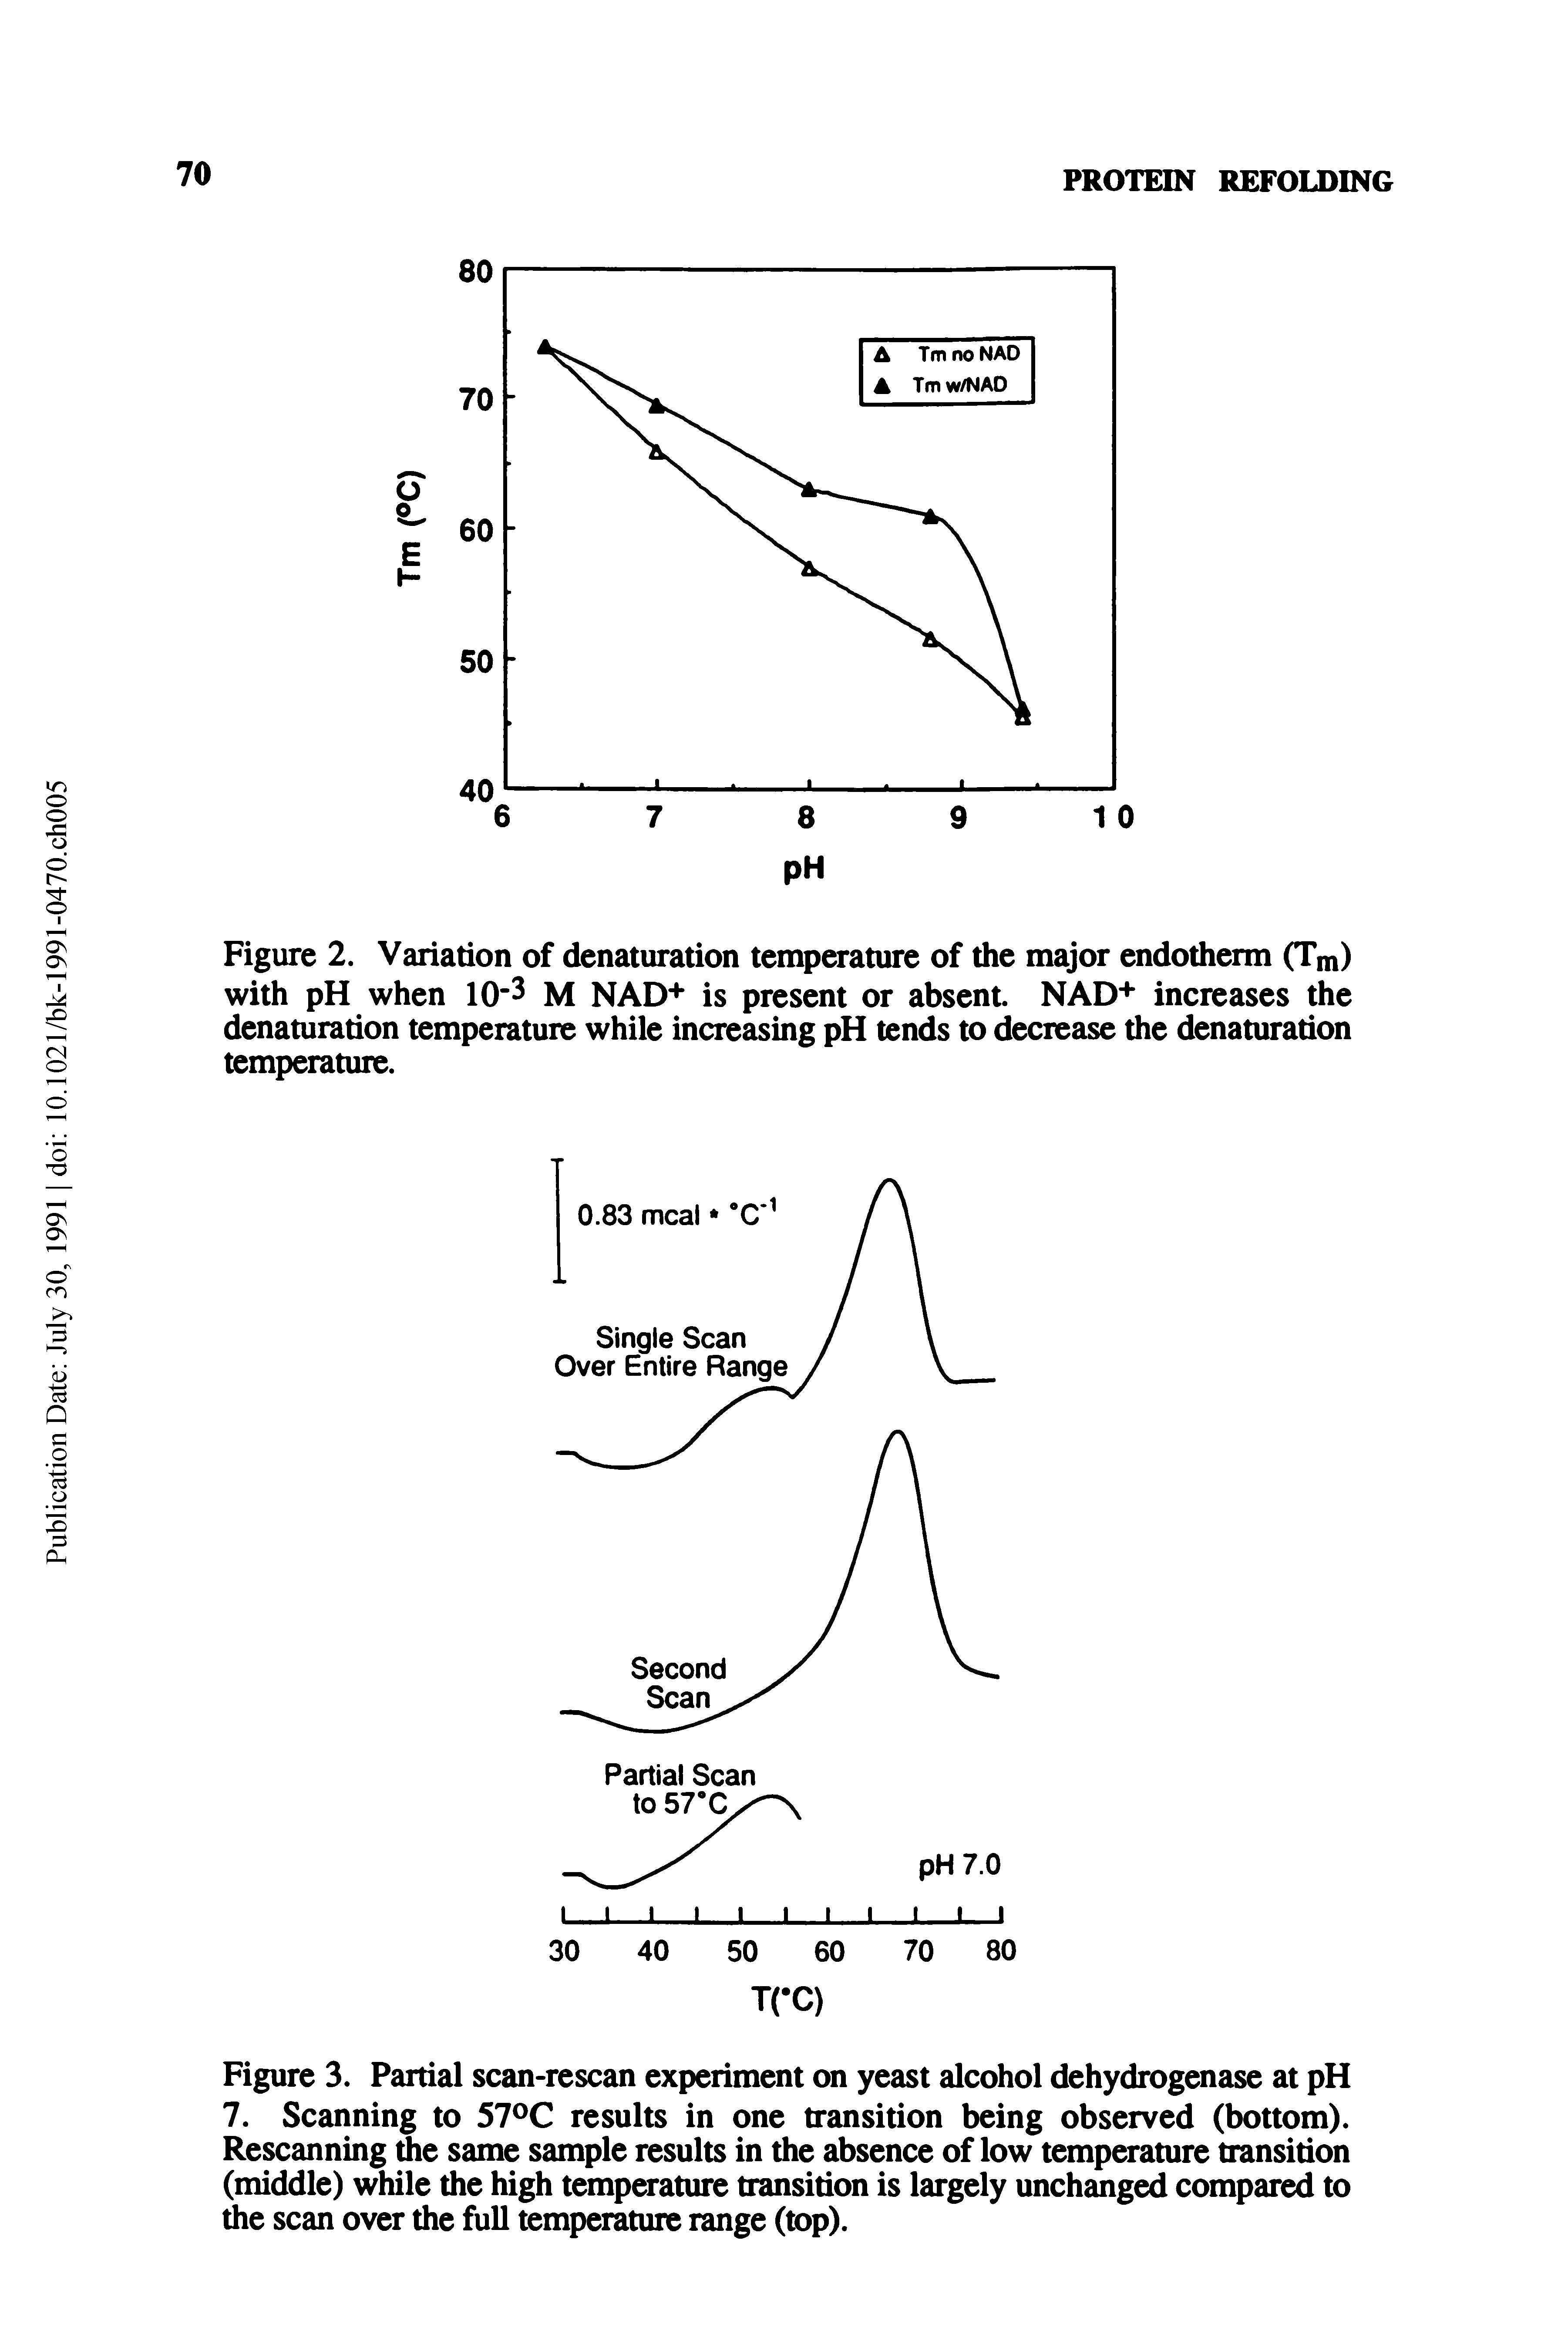 Figure 3. Partial scan-rescan experiment on yeast alcohol dehydrogenase at pH 7. Scanning to 57 C results in one transition being observed (bottom). Rescanning the same sample results in the absence of low temperature transition (middle) while the high temperature transition is largely unchanged compared to the scan over the full temperature range (top).